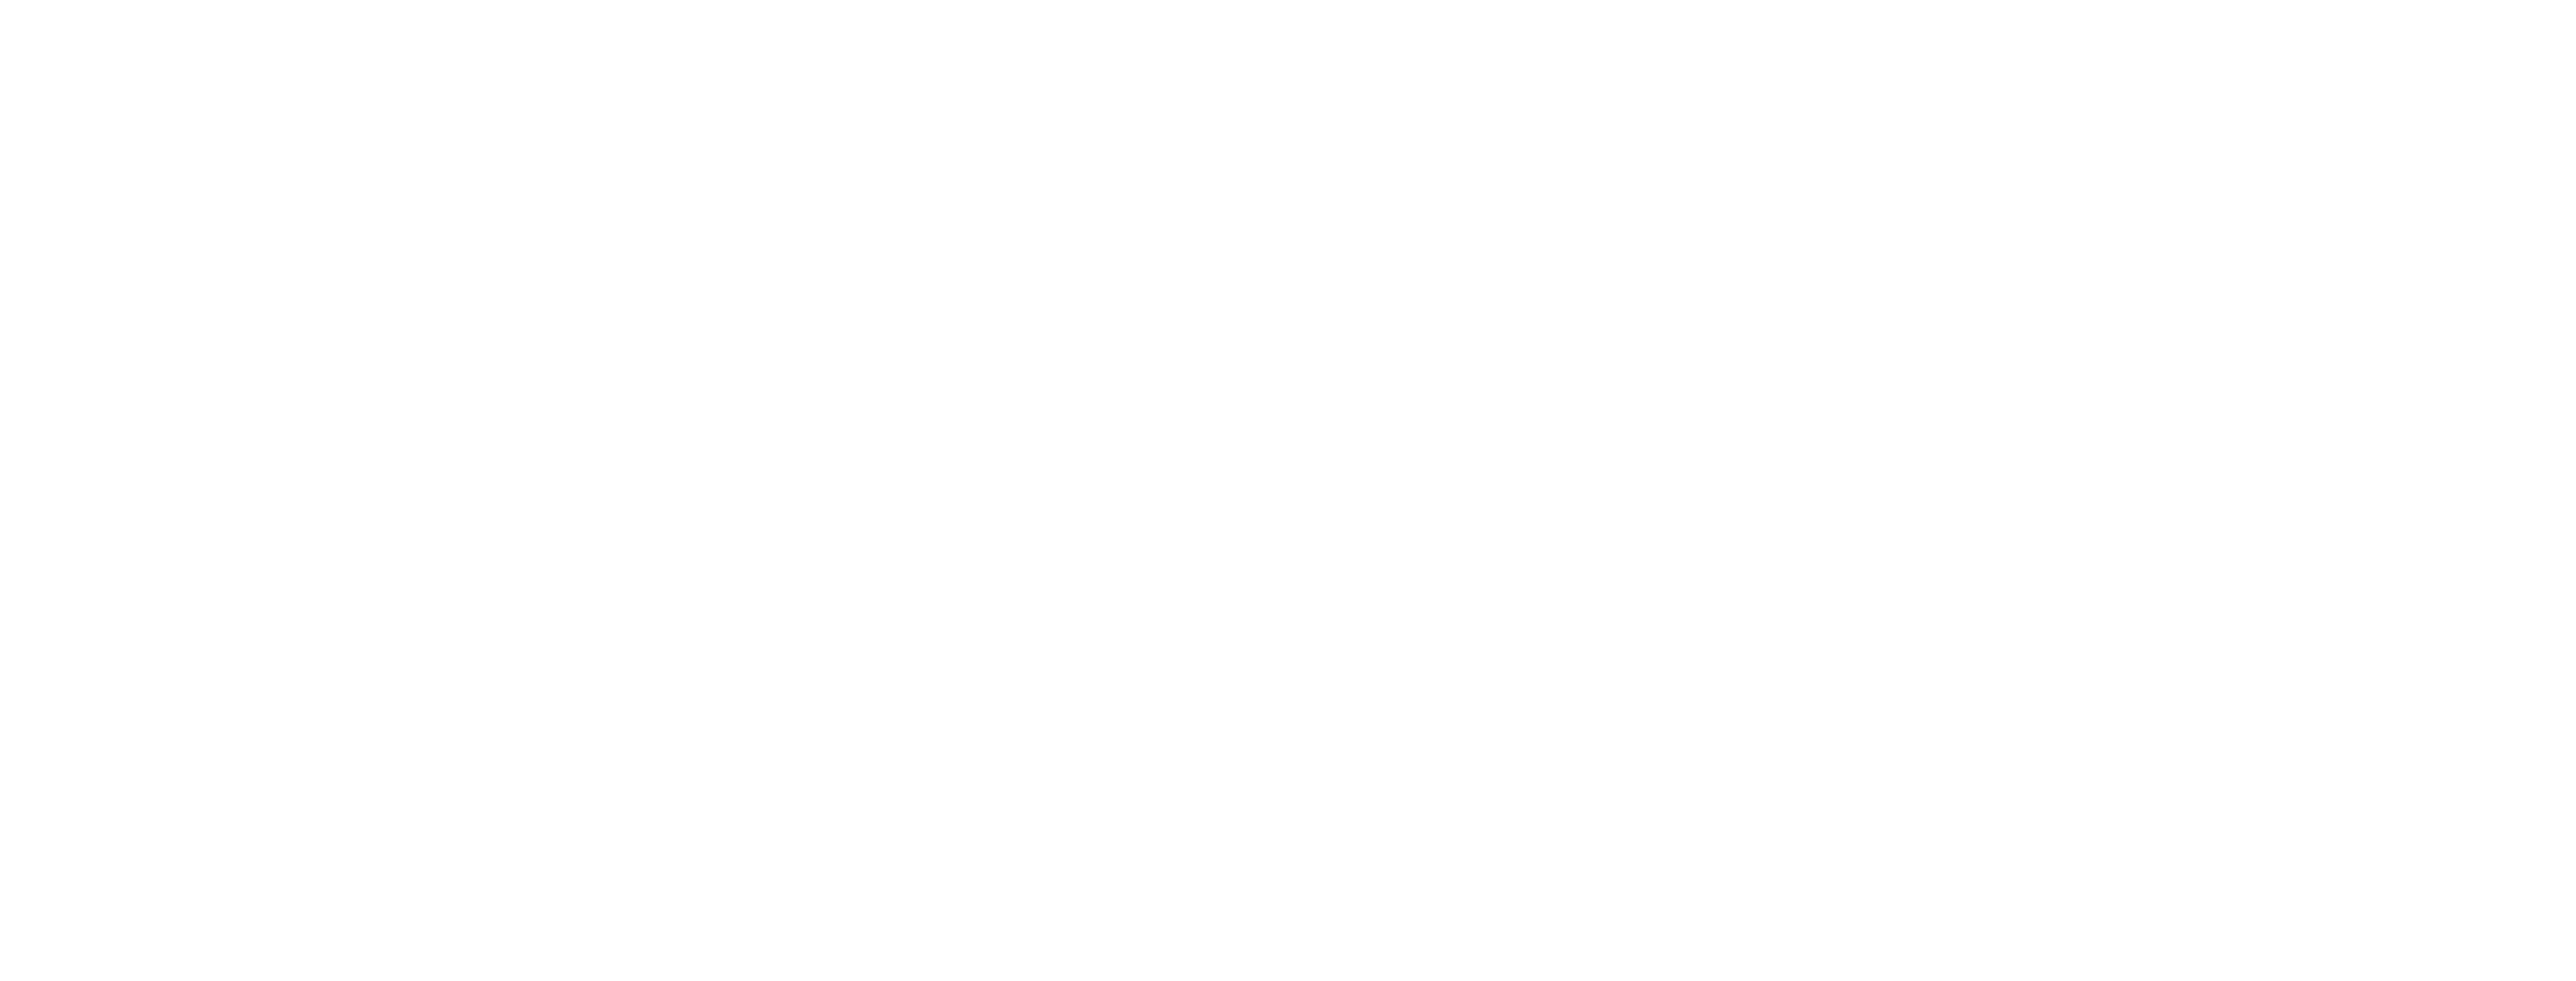 Eworkers